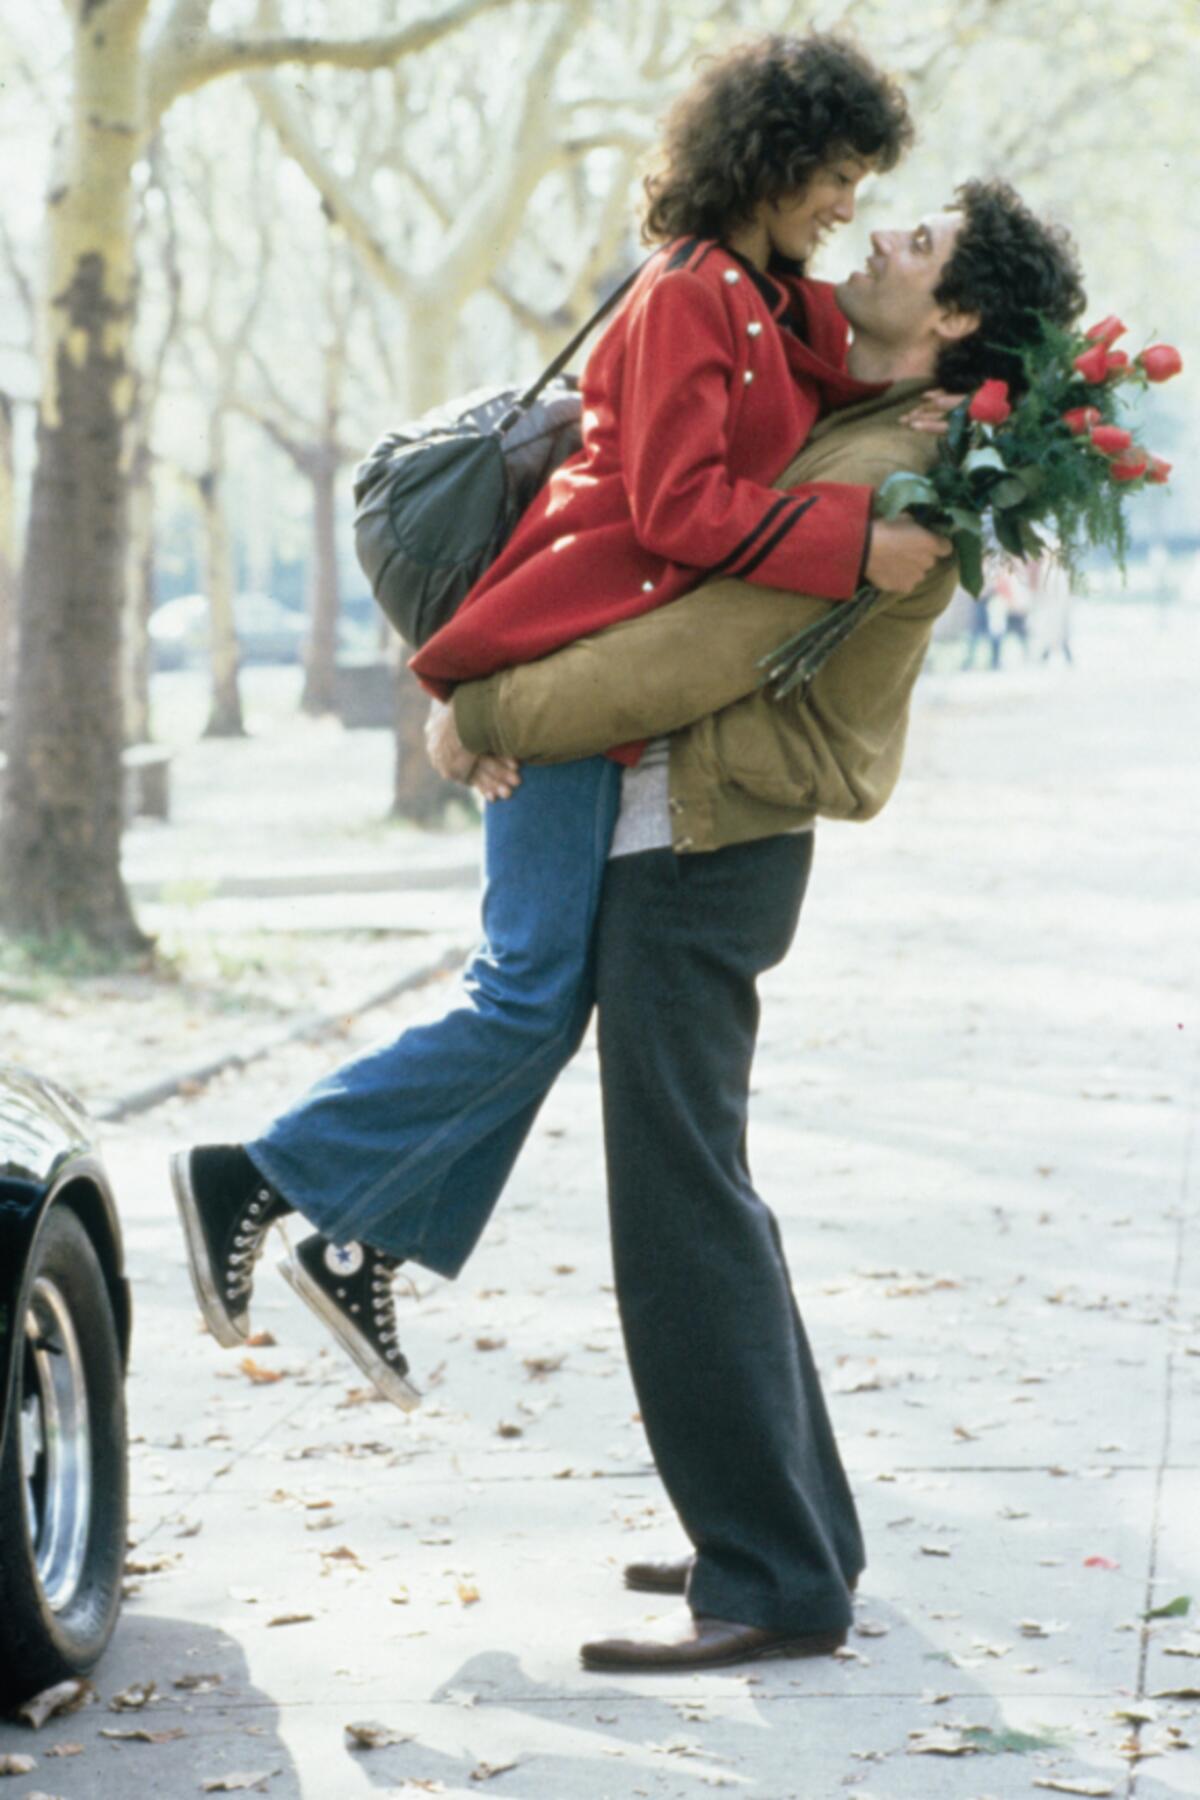 A man lifts a woman holding flowers